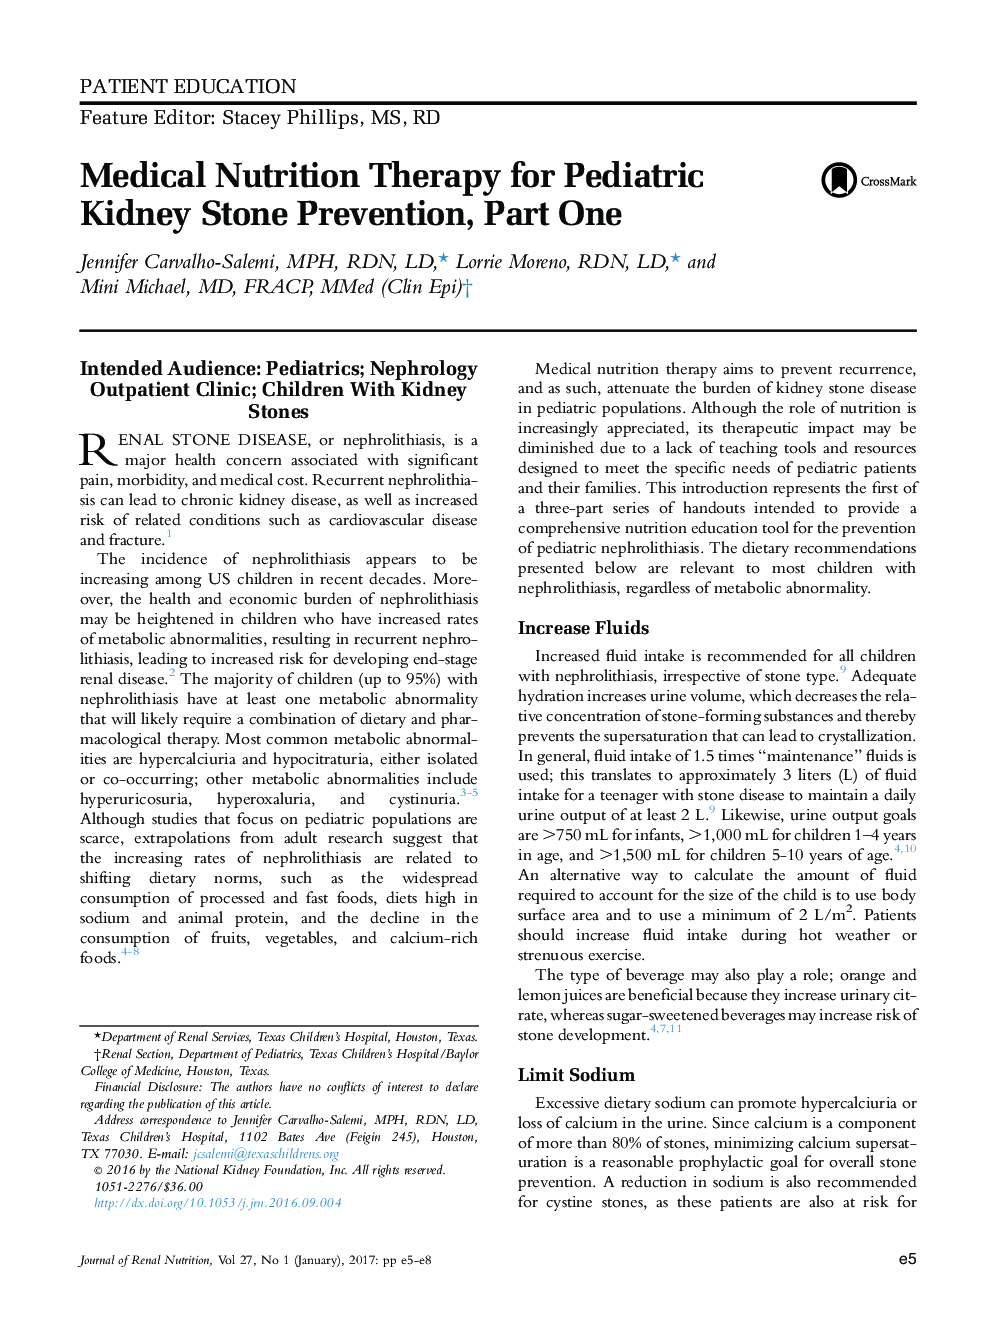 Medical Nutrition Therapy for Pediatric Kidney Stone Prevention, Part One